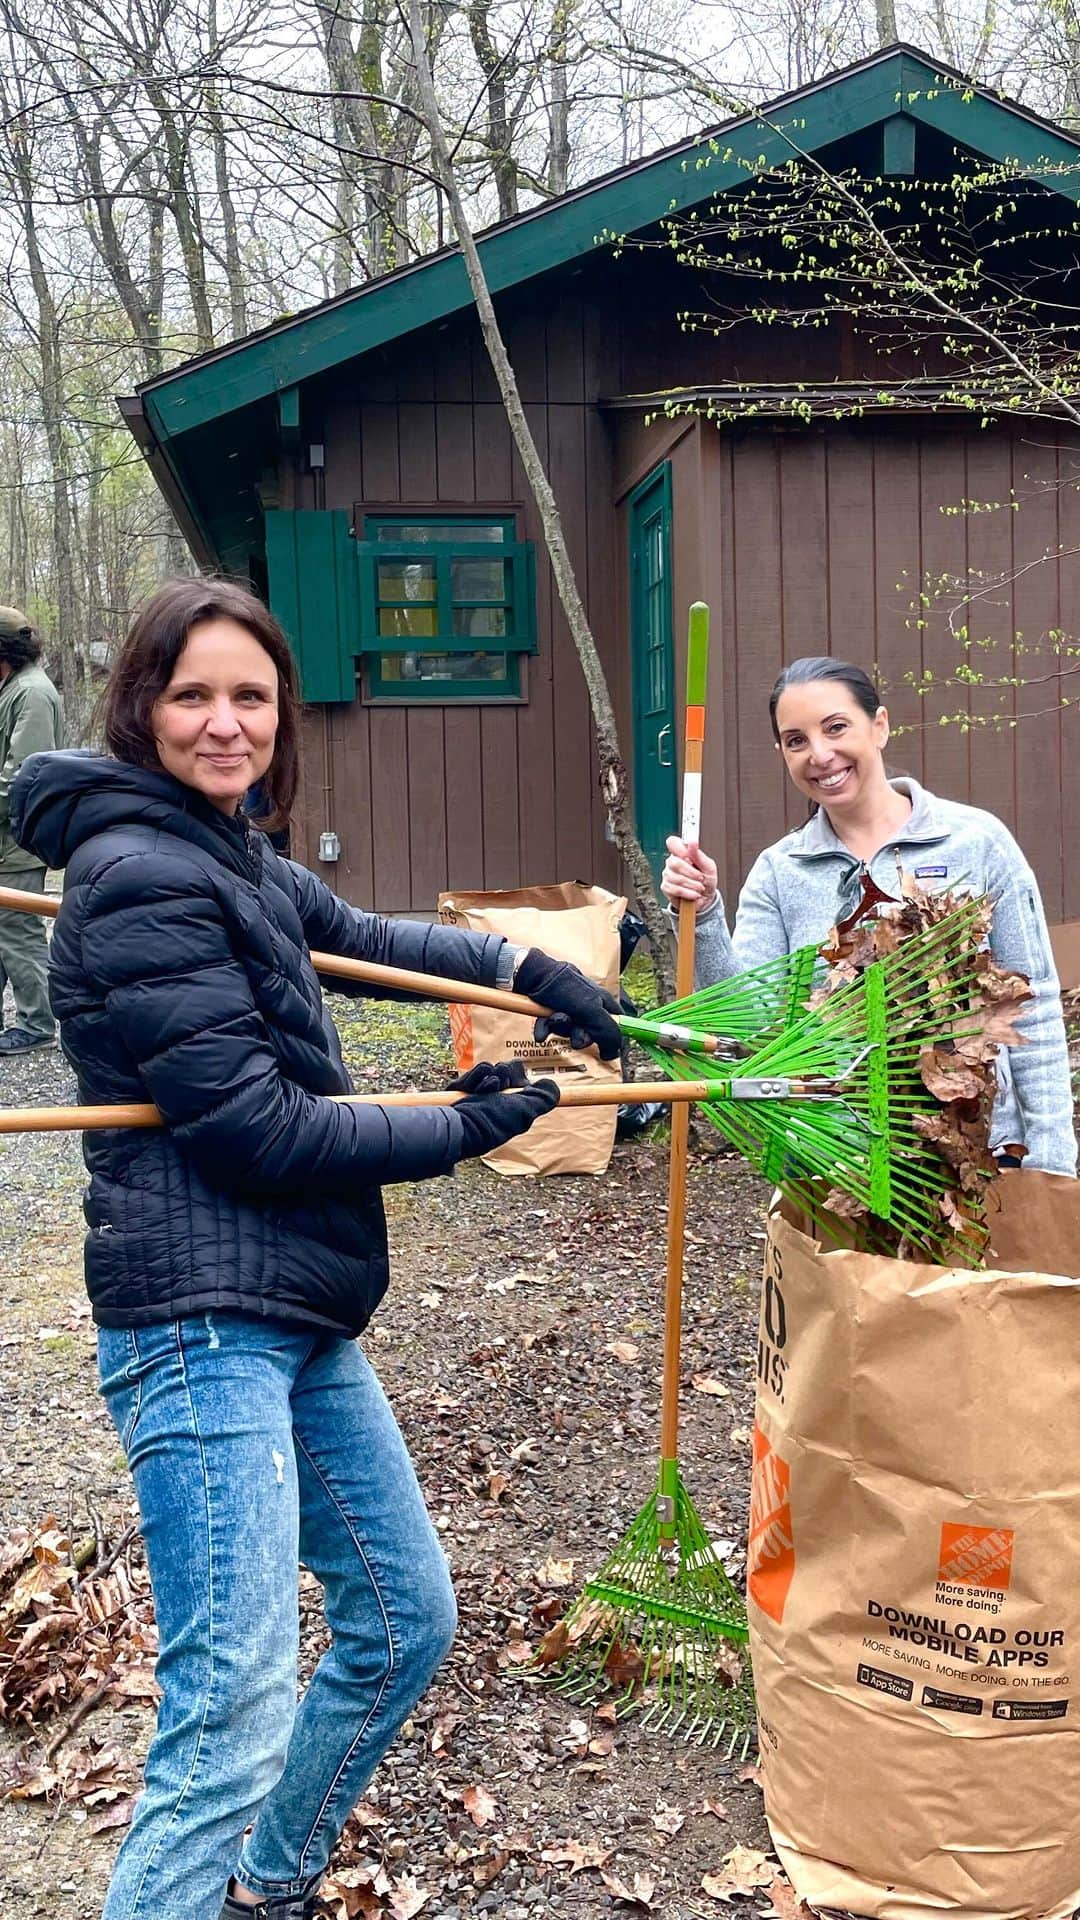 Weledaのインスタグラム：「Happy Earth Day! 🌿🌎 This week our team at Weleda North America volunteered at Cranberry Lake Preserve with Pitch in for Parks to help clean up and support biodiversity!   Our team helped support Mother Earth by: 🌿 Invasive plant management by removing barberry and other invasive species 🌿 Planting beech tree saplings 🌿Cleaning up the nature center by raking leaves, weeding, and painting the fence  We hope you spend some time in nature today and celebrate the beautiful place that we call home! #EarthDay」